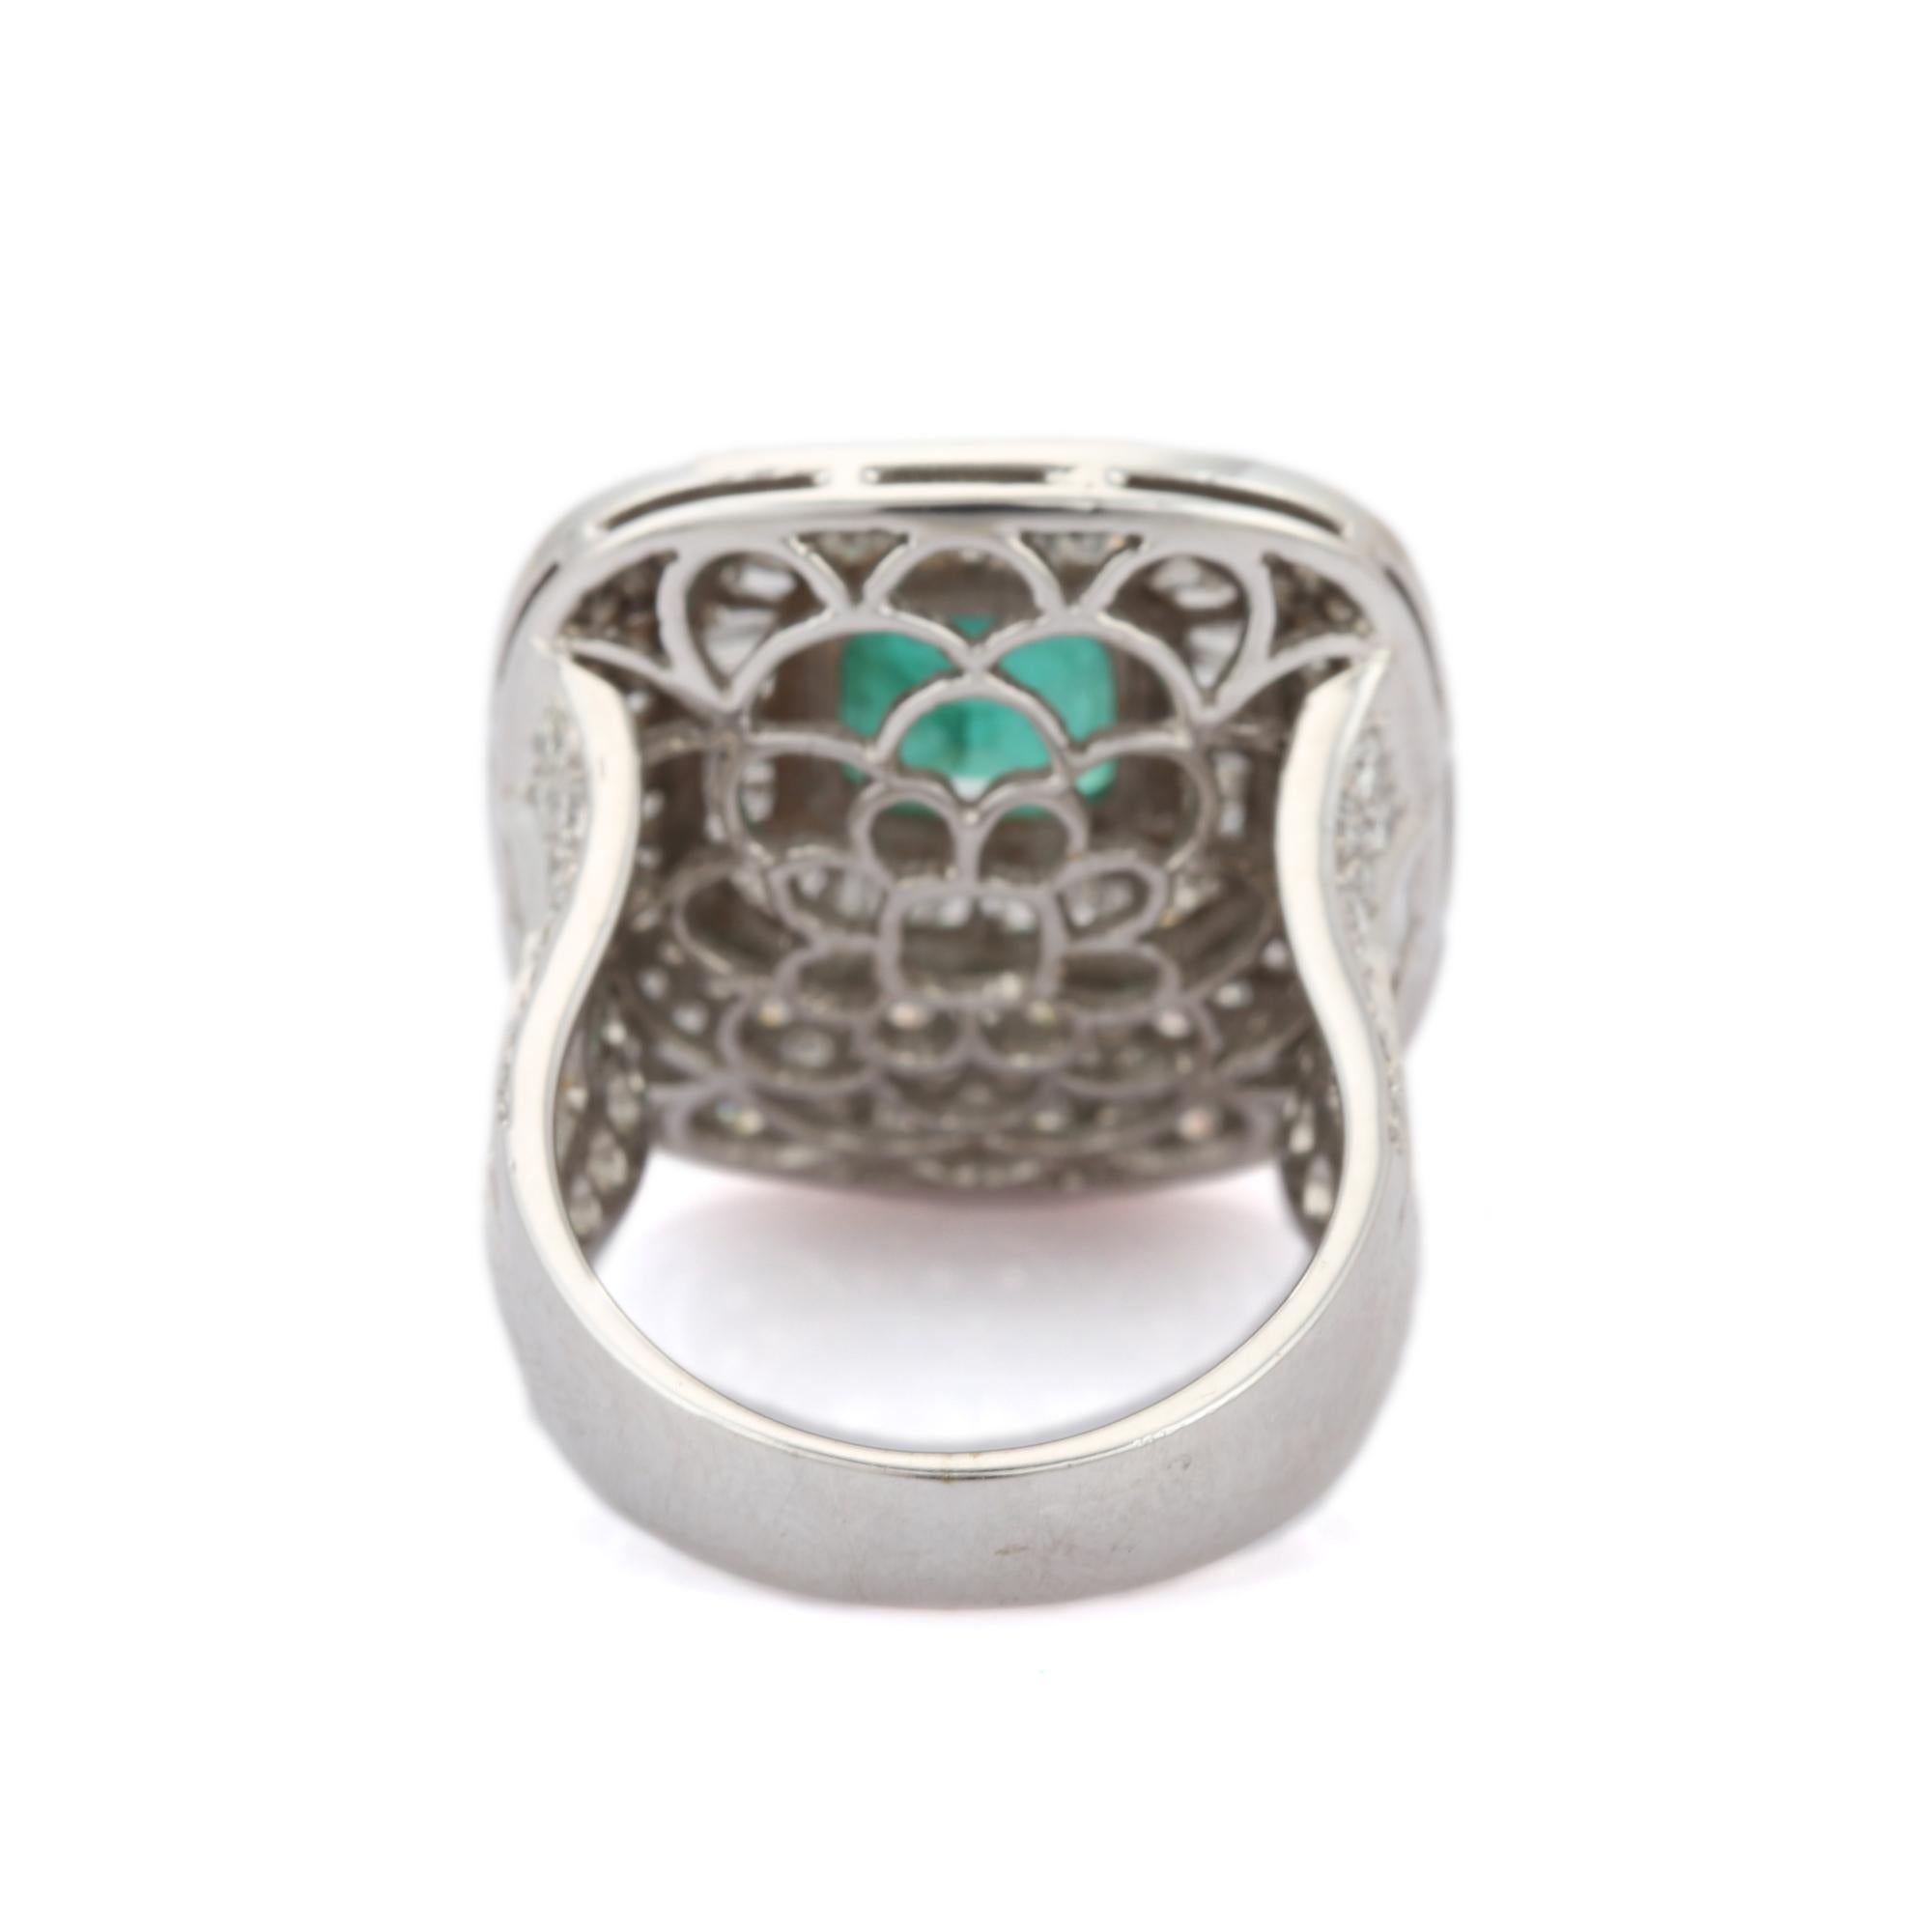 For Sale:  18kt Solid White Gold Diamond Studded Big Emerald Ring For Women 6